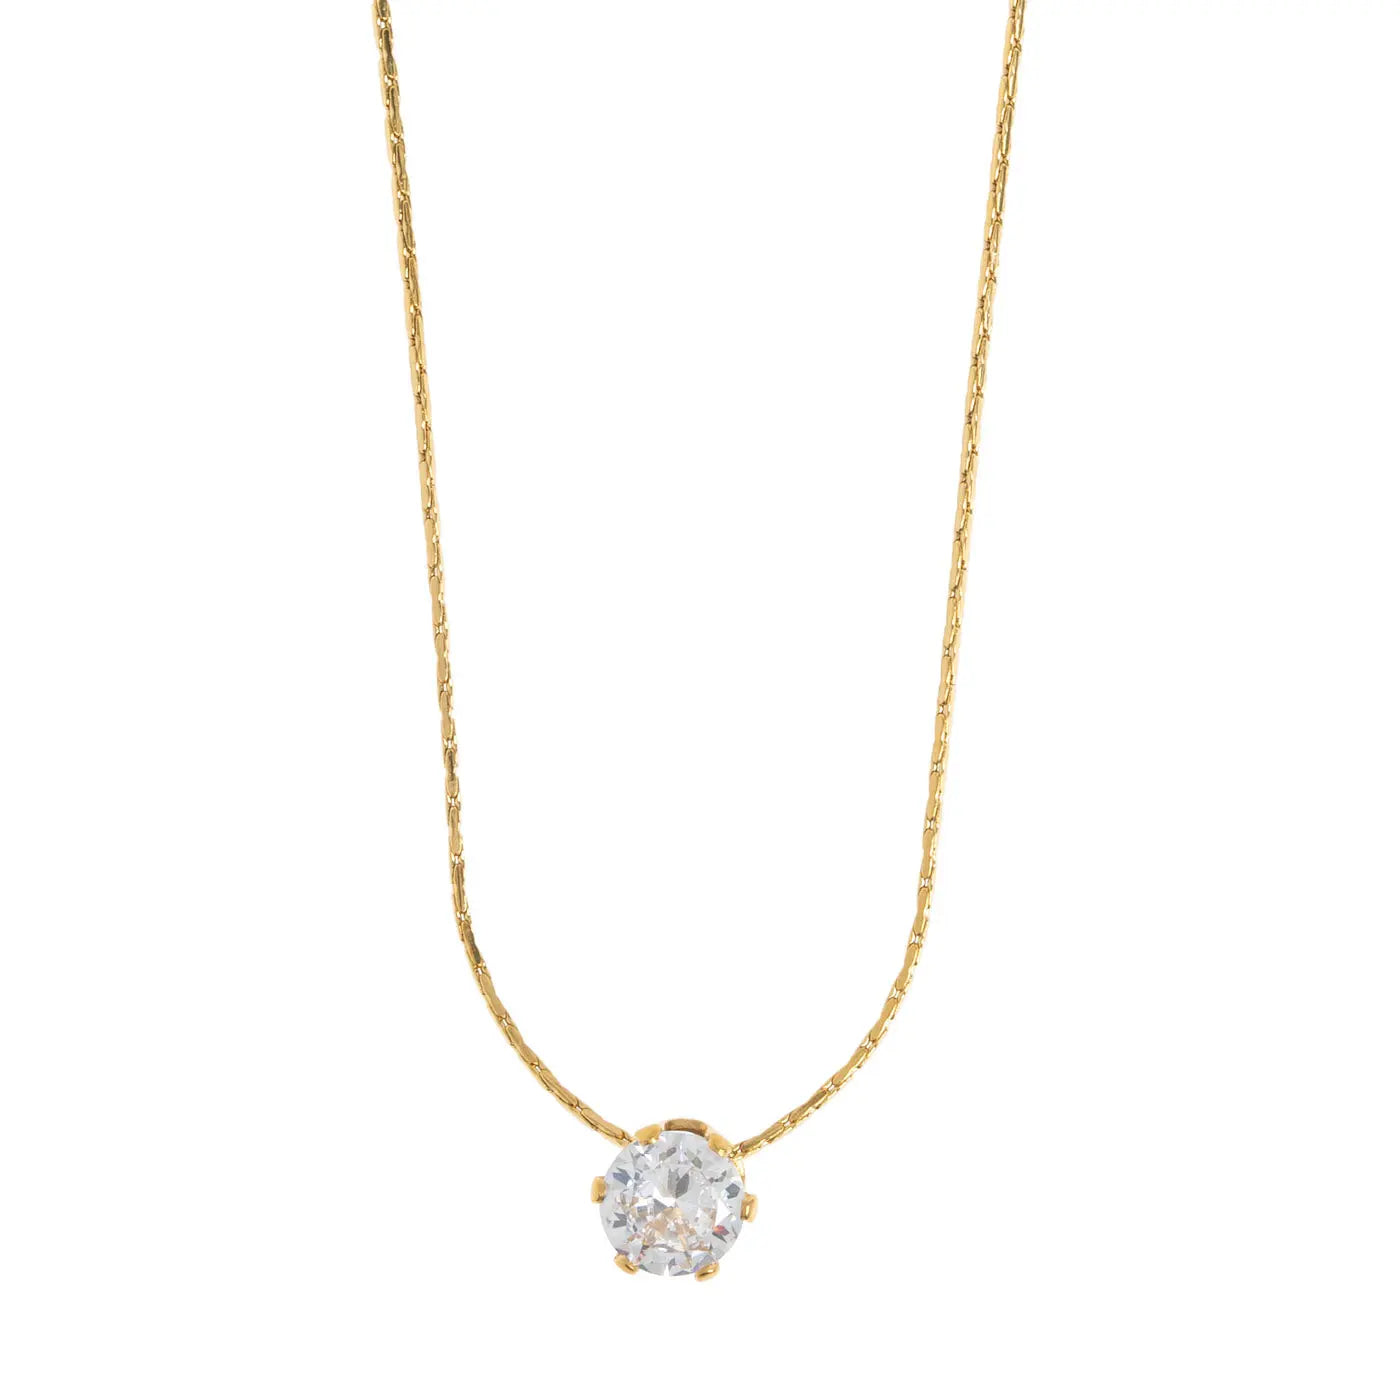 Audrey - Crystal Necklace Stainless Steel